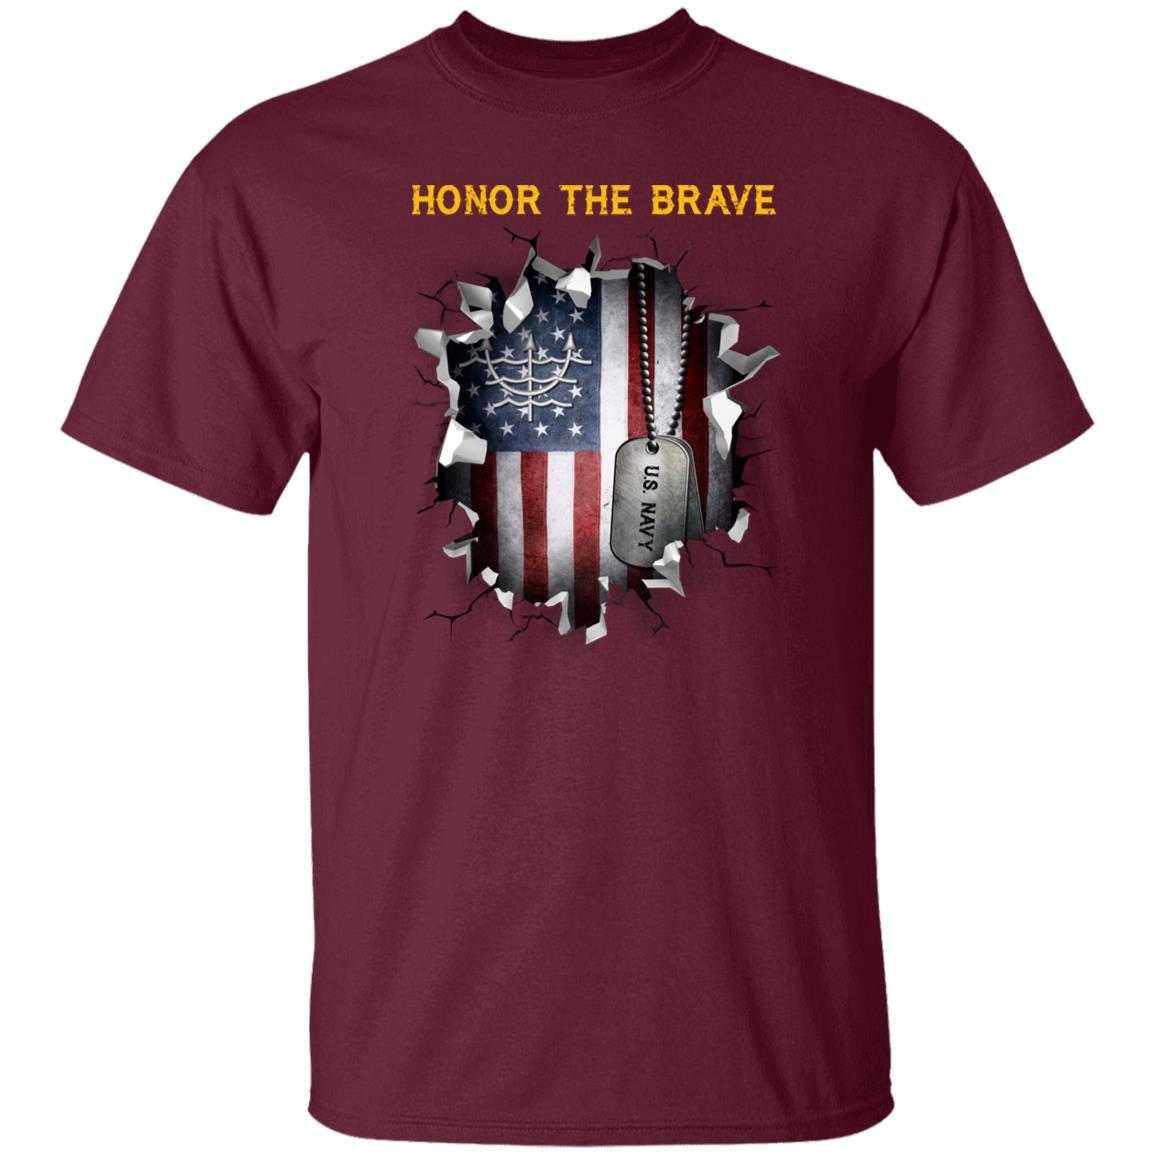 Navy Ocean Systems Technician Navy OT - Honor The Brave Front Shirt